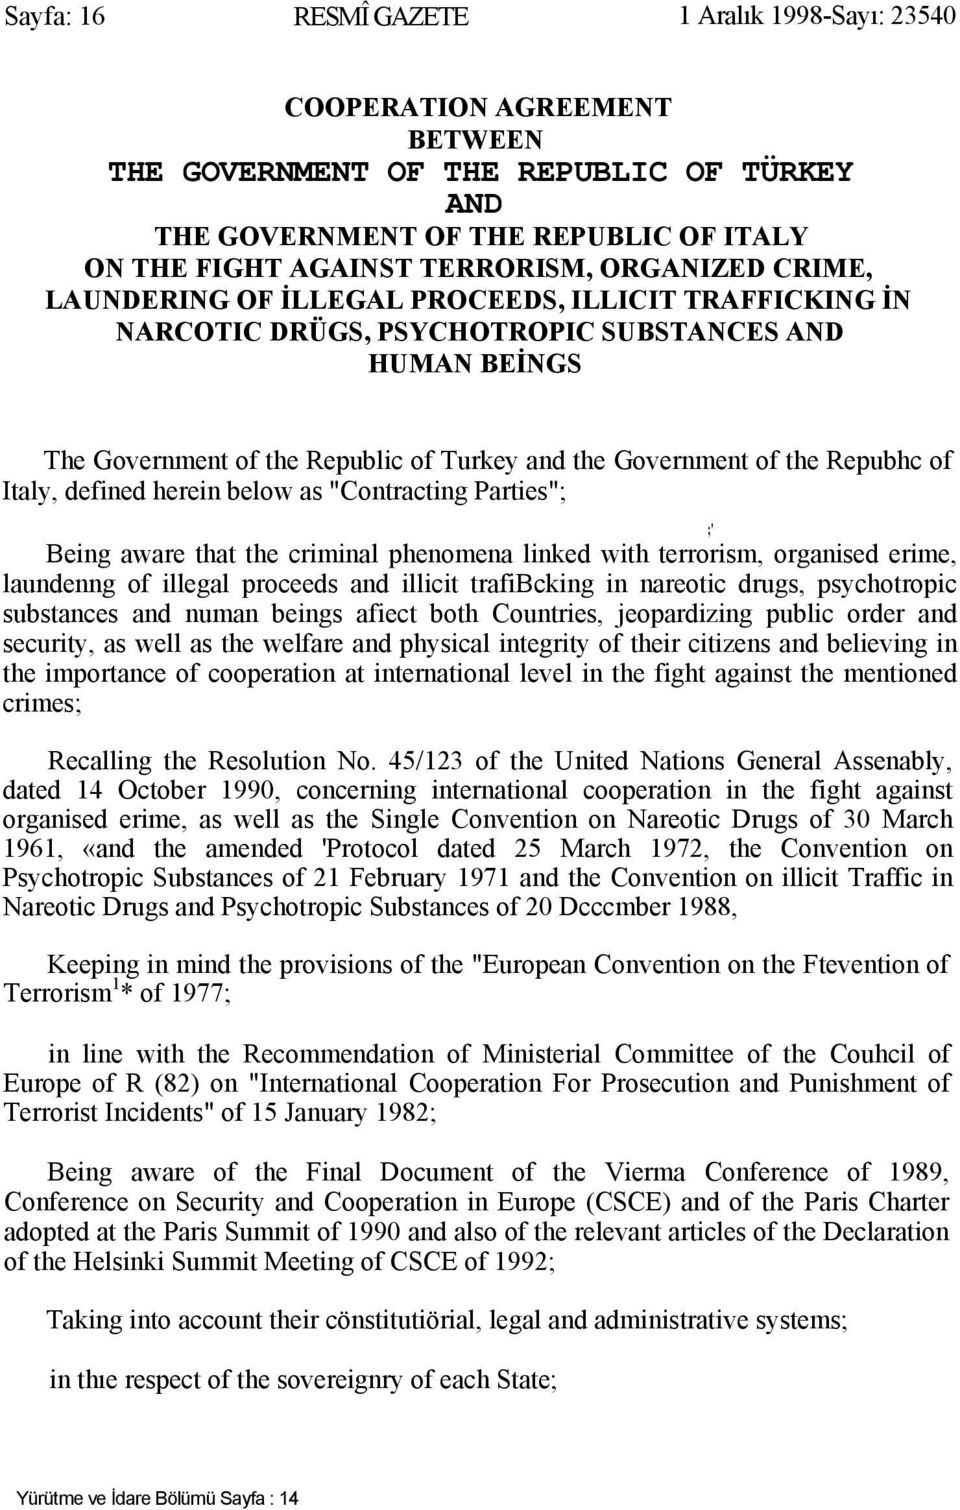 Repubhc of Italy, defined herein below as "Contracting Parties"; ;' Being aware that the criminal phenomena linked with terrorism, organised erime, laundenng of illegal proceeds and illicit